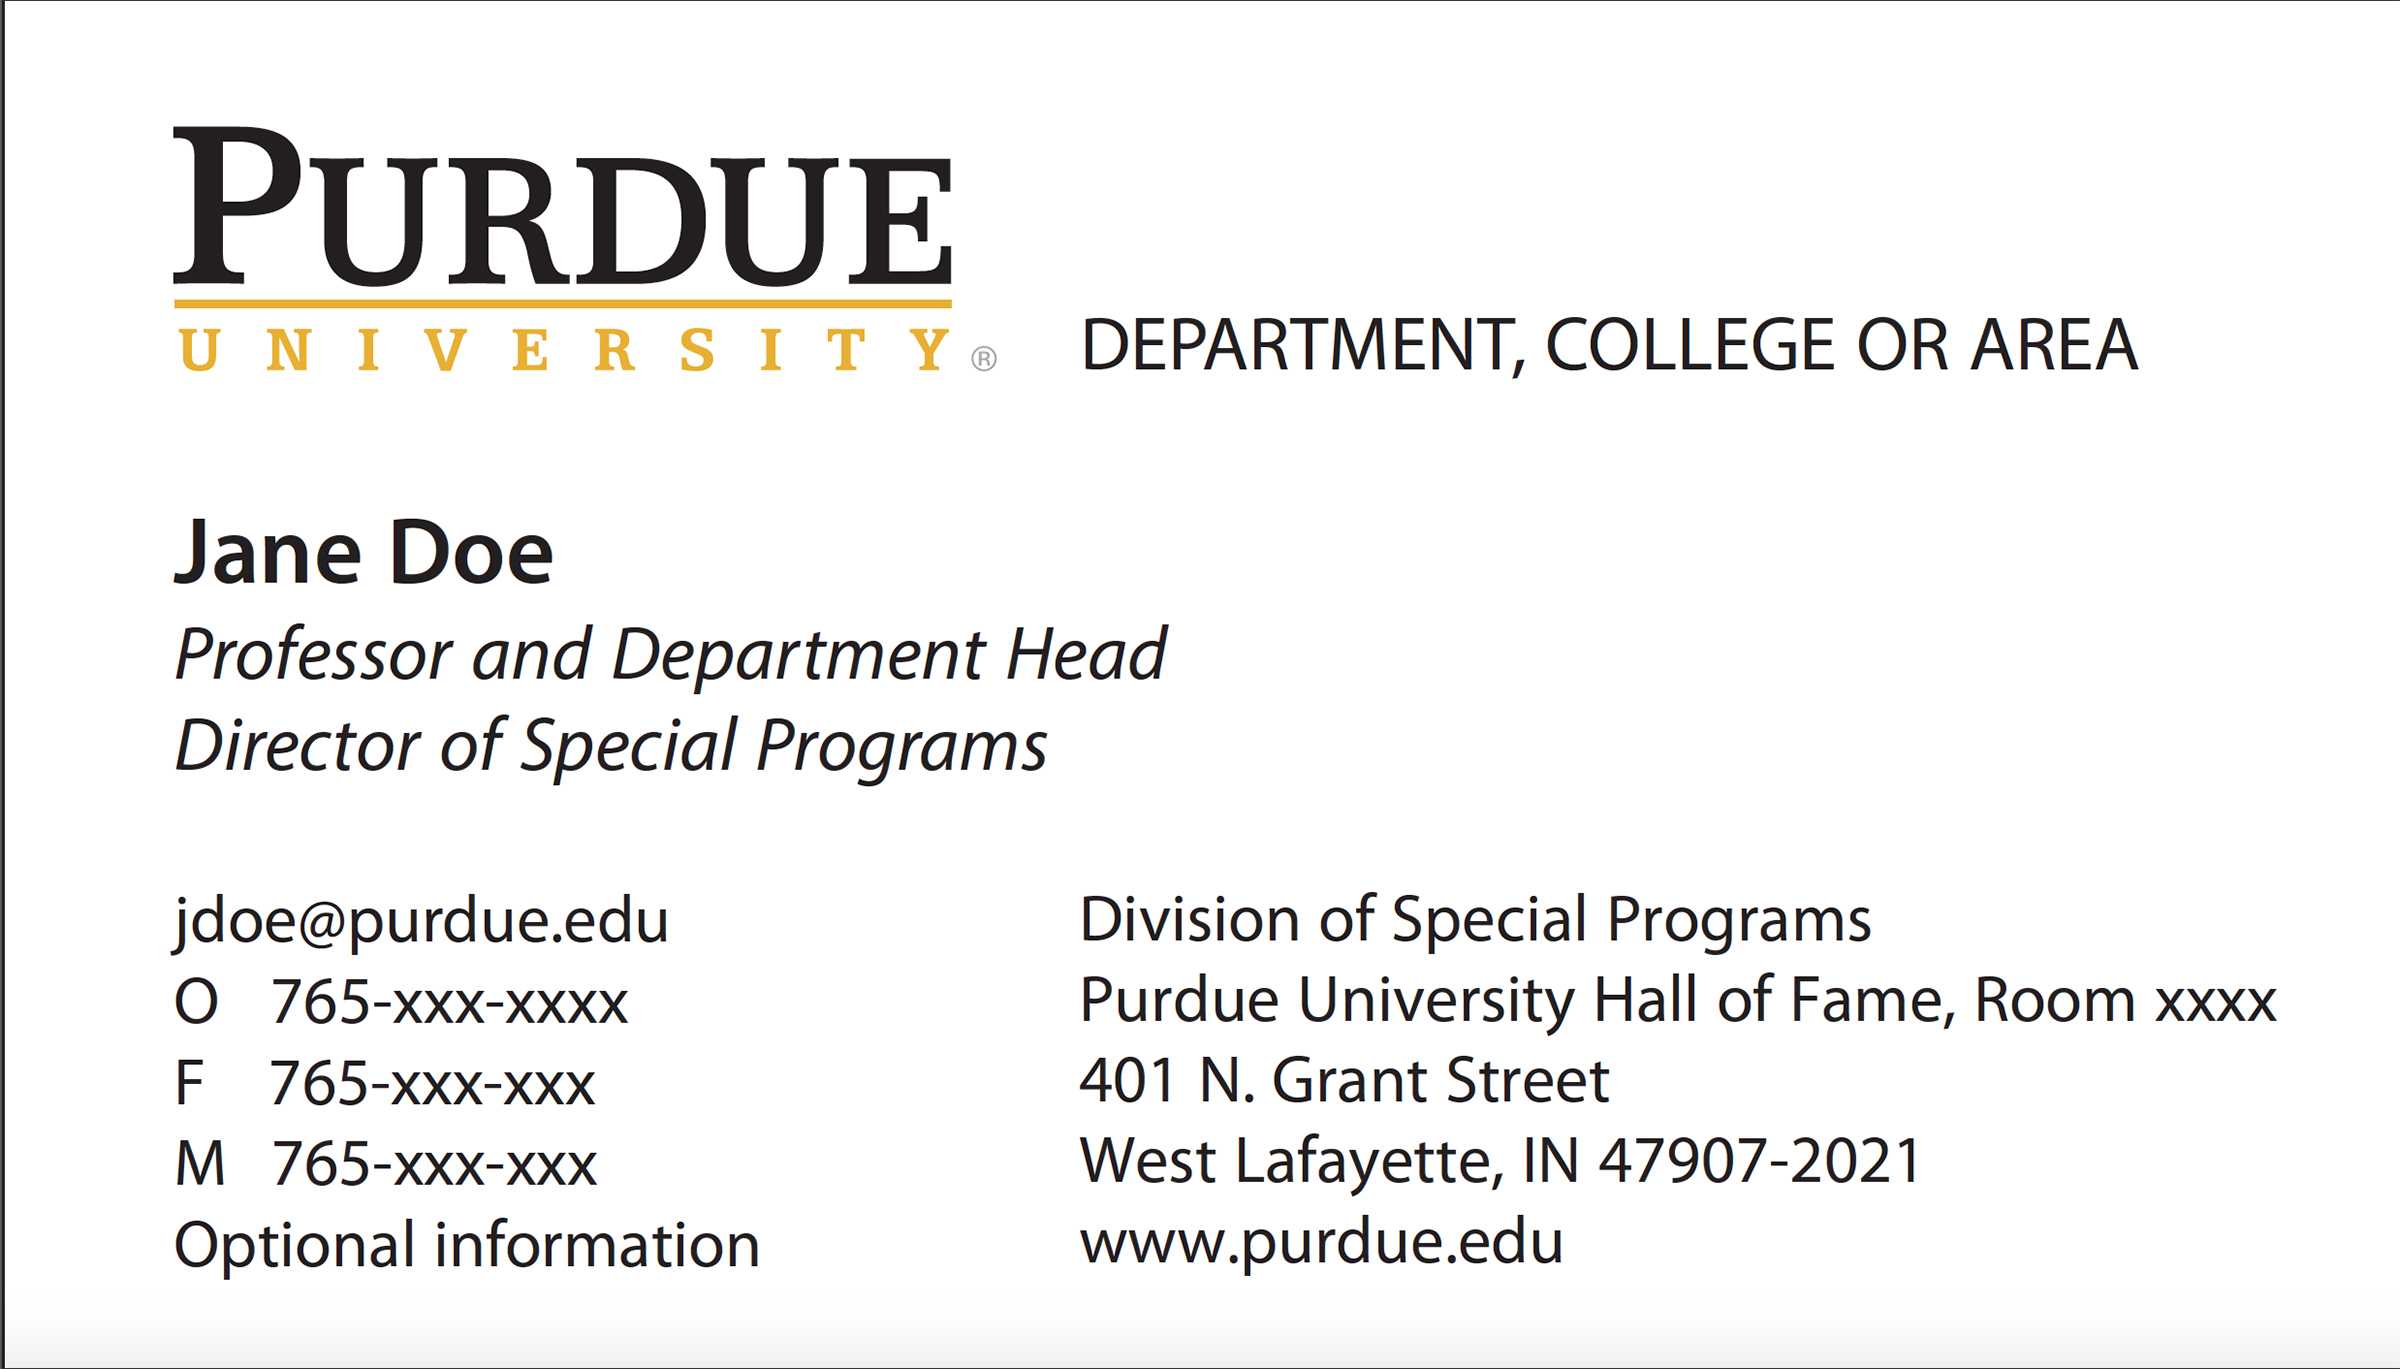 New Business Card Template Now Online - Purdue University News For Student Business Card Template